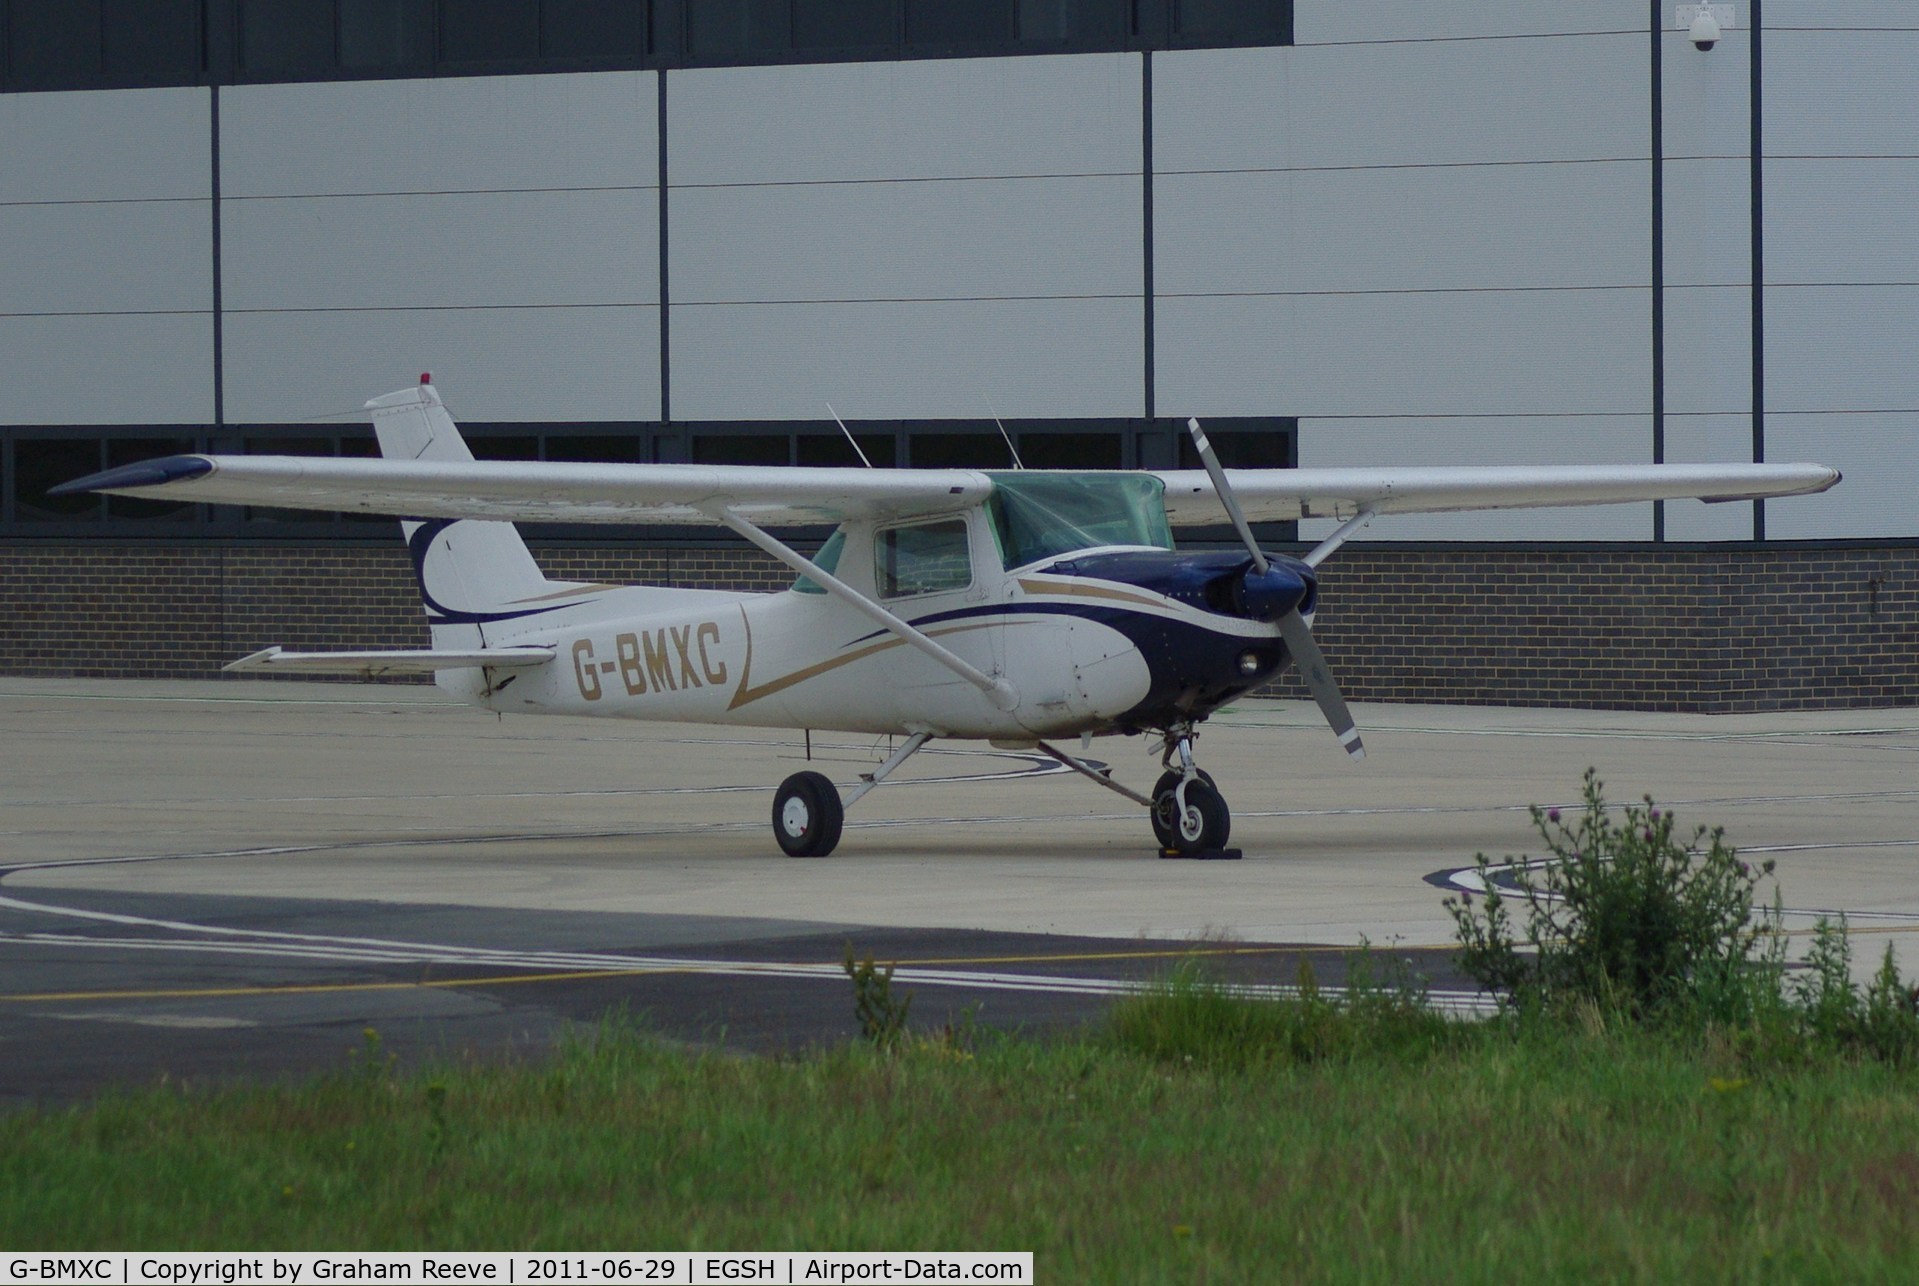 G-BMXC, 1977 Cessna 152 C/N 152-80416, Parked at Norwich.